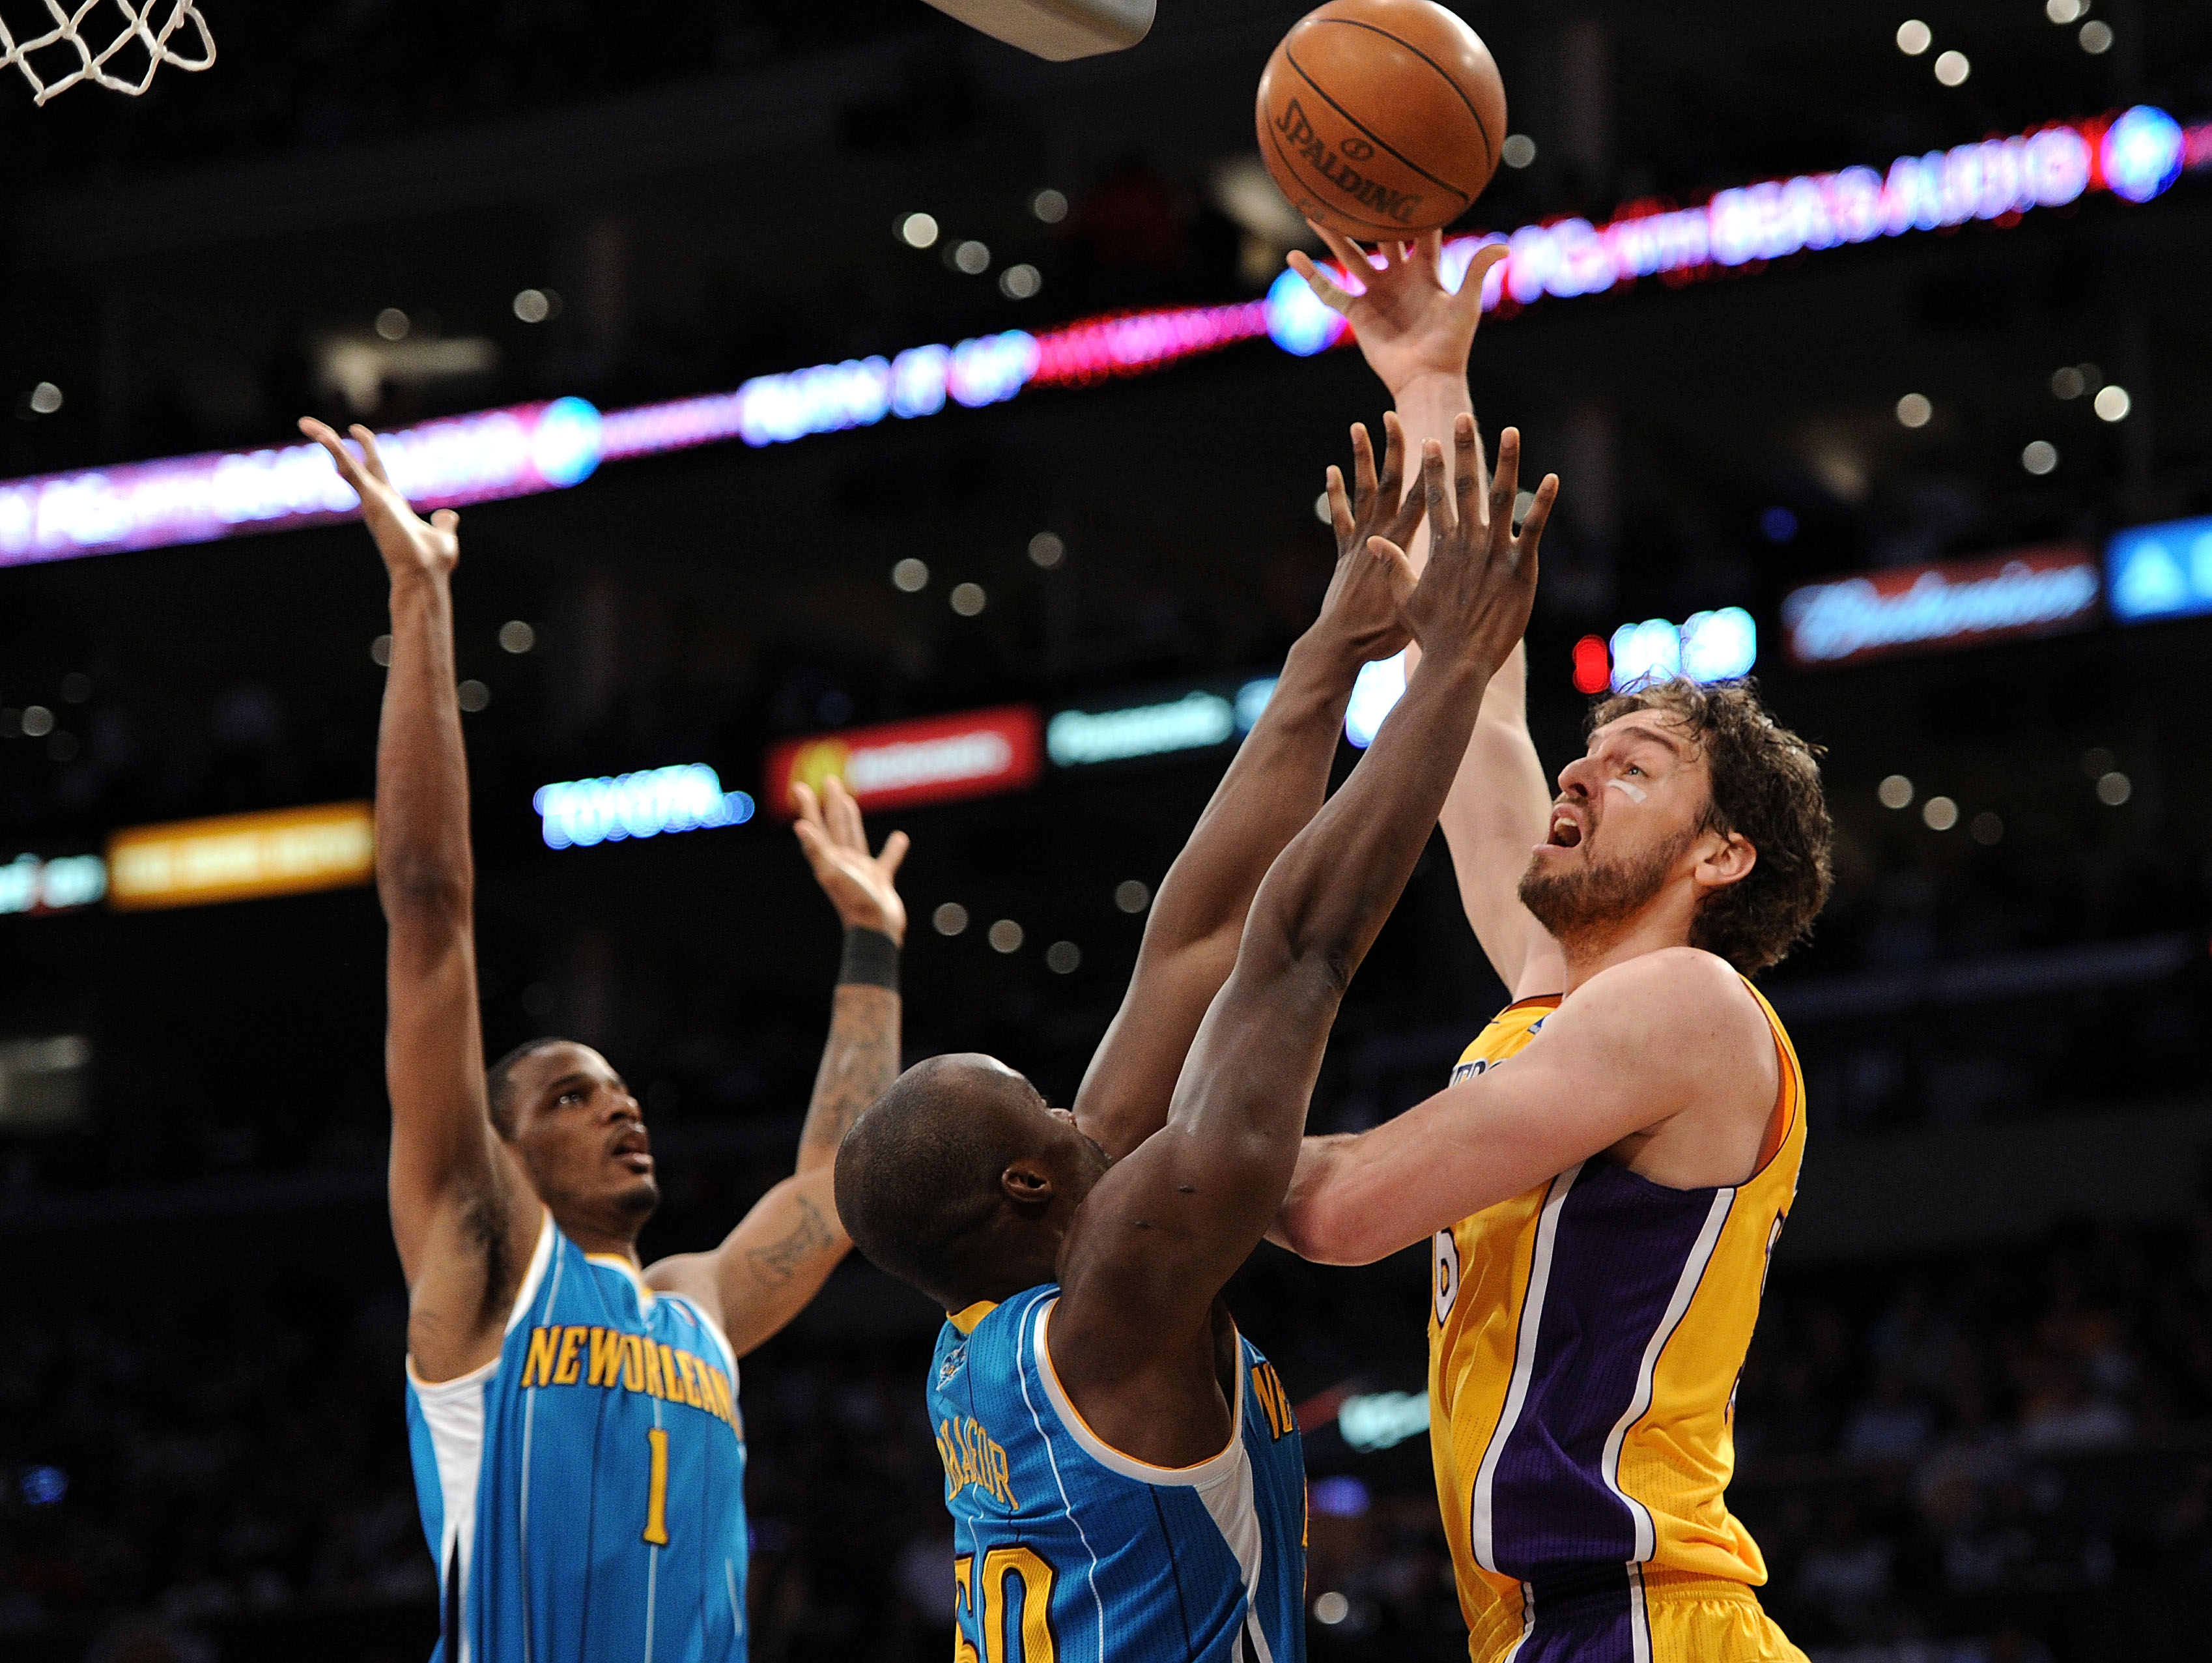 LOS ANGELES, CA - APRIL 20:  Pau Gasol #16 of the Los Angeles Lakers shoots over Emeka Okafor #50 and Trevor Ariza #1 of the New Orleans Hornets in the first quarter in Game Two of the Western Conference Quarterfinals in the 2011 NBA Playoffs on April 20,